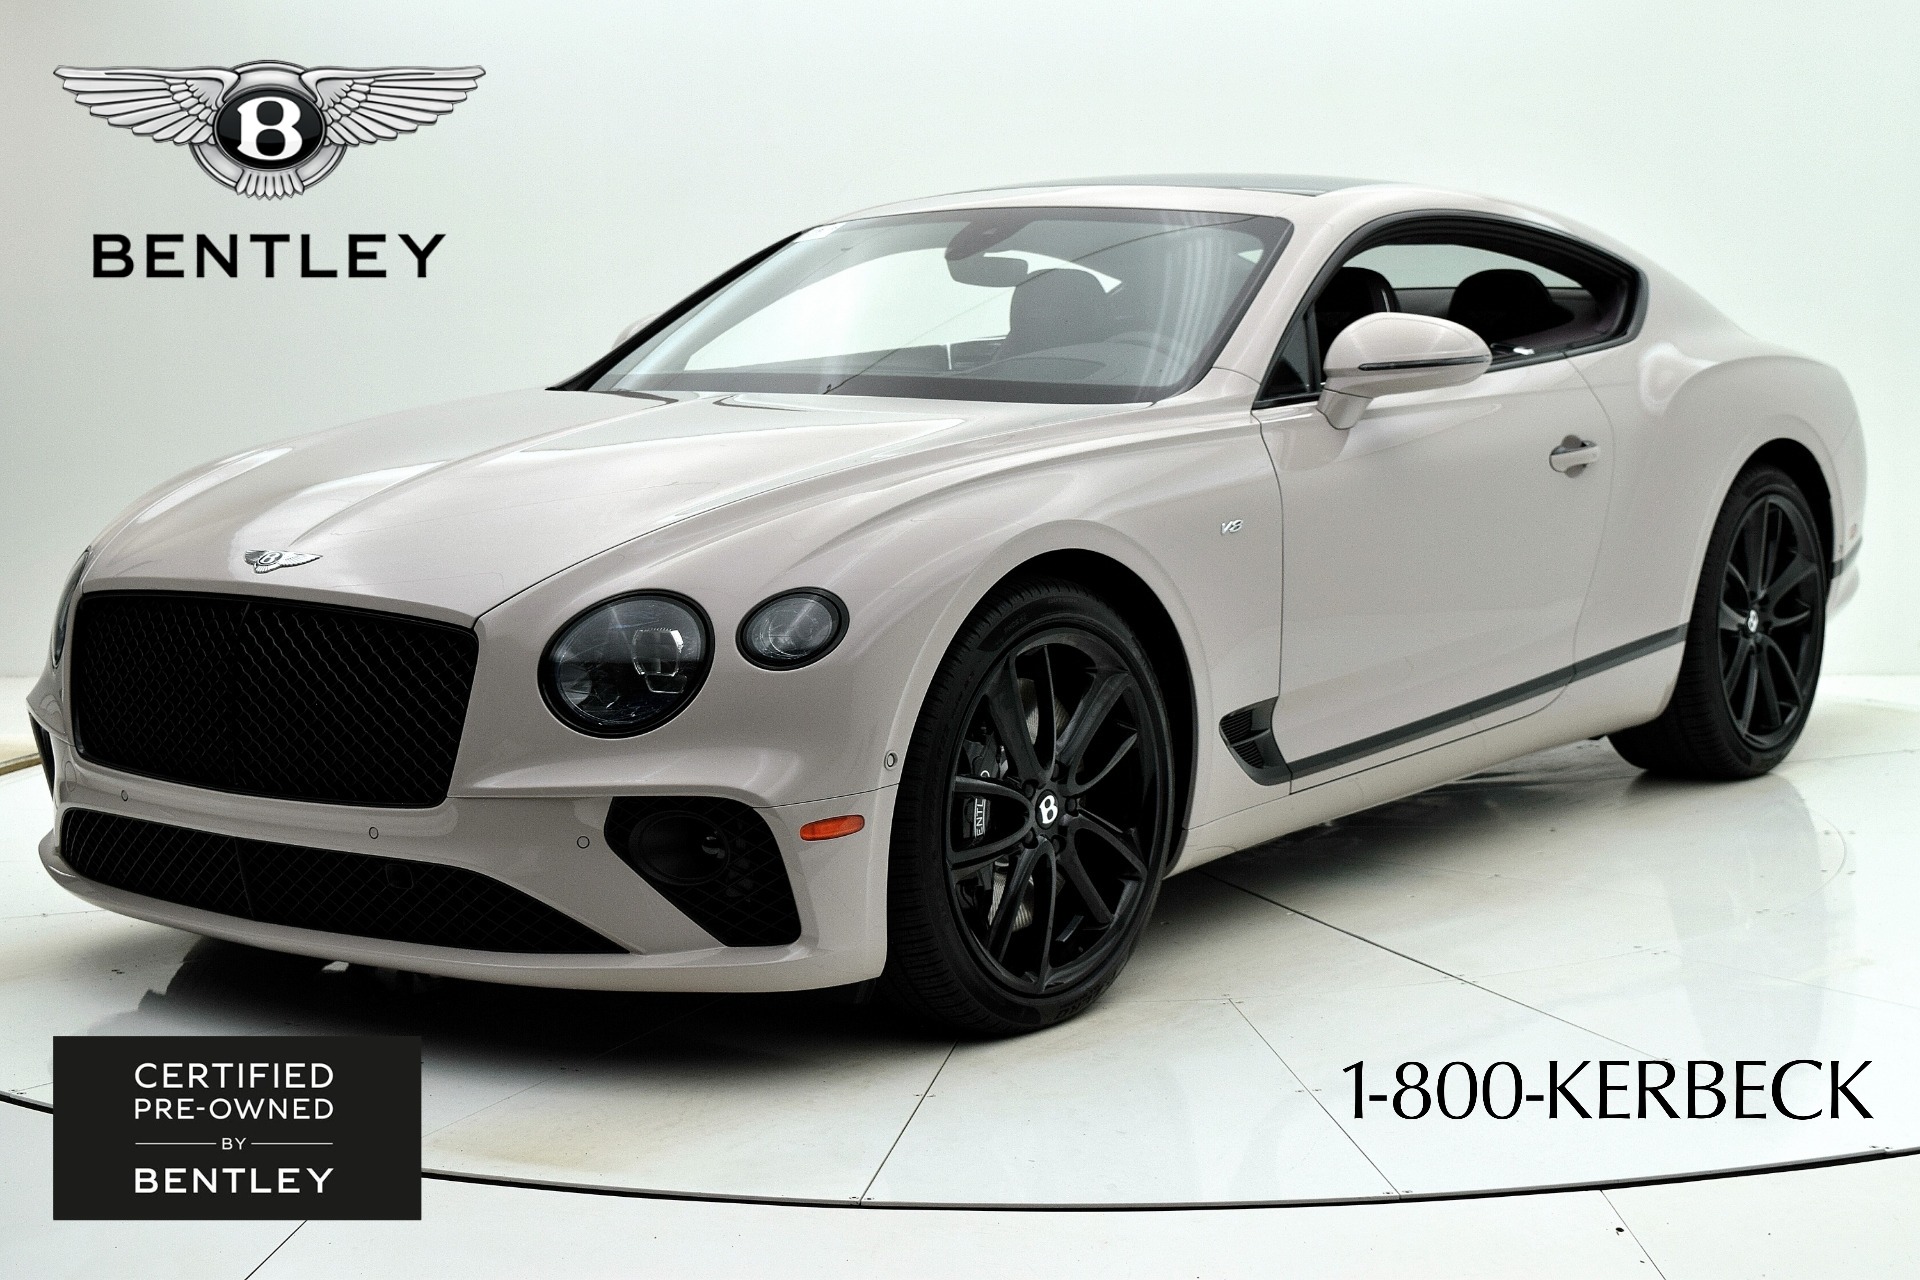 Used 2021 Bentley Continental GT V8/ LEASE OPTIONS AVAILABLE for sale $199,000 at Bentley Palmyra N.J. in Palmyra NJ 08065 2